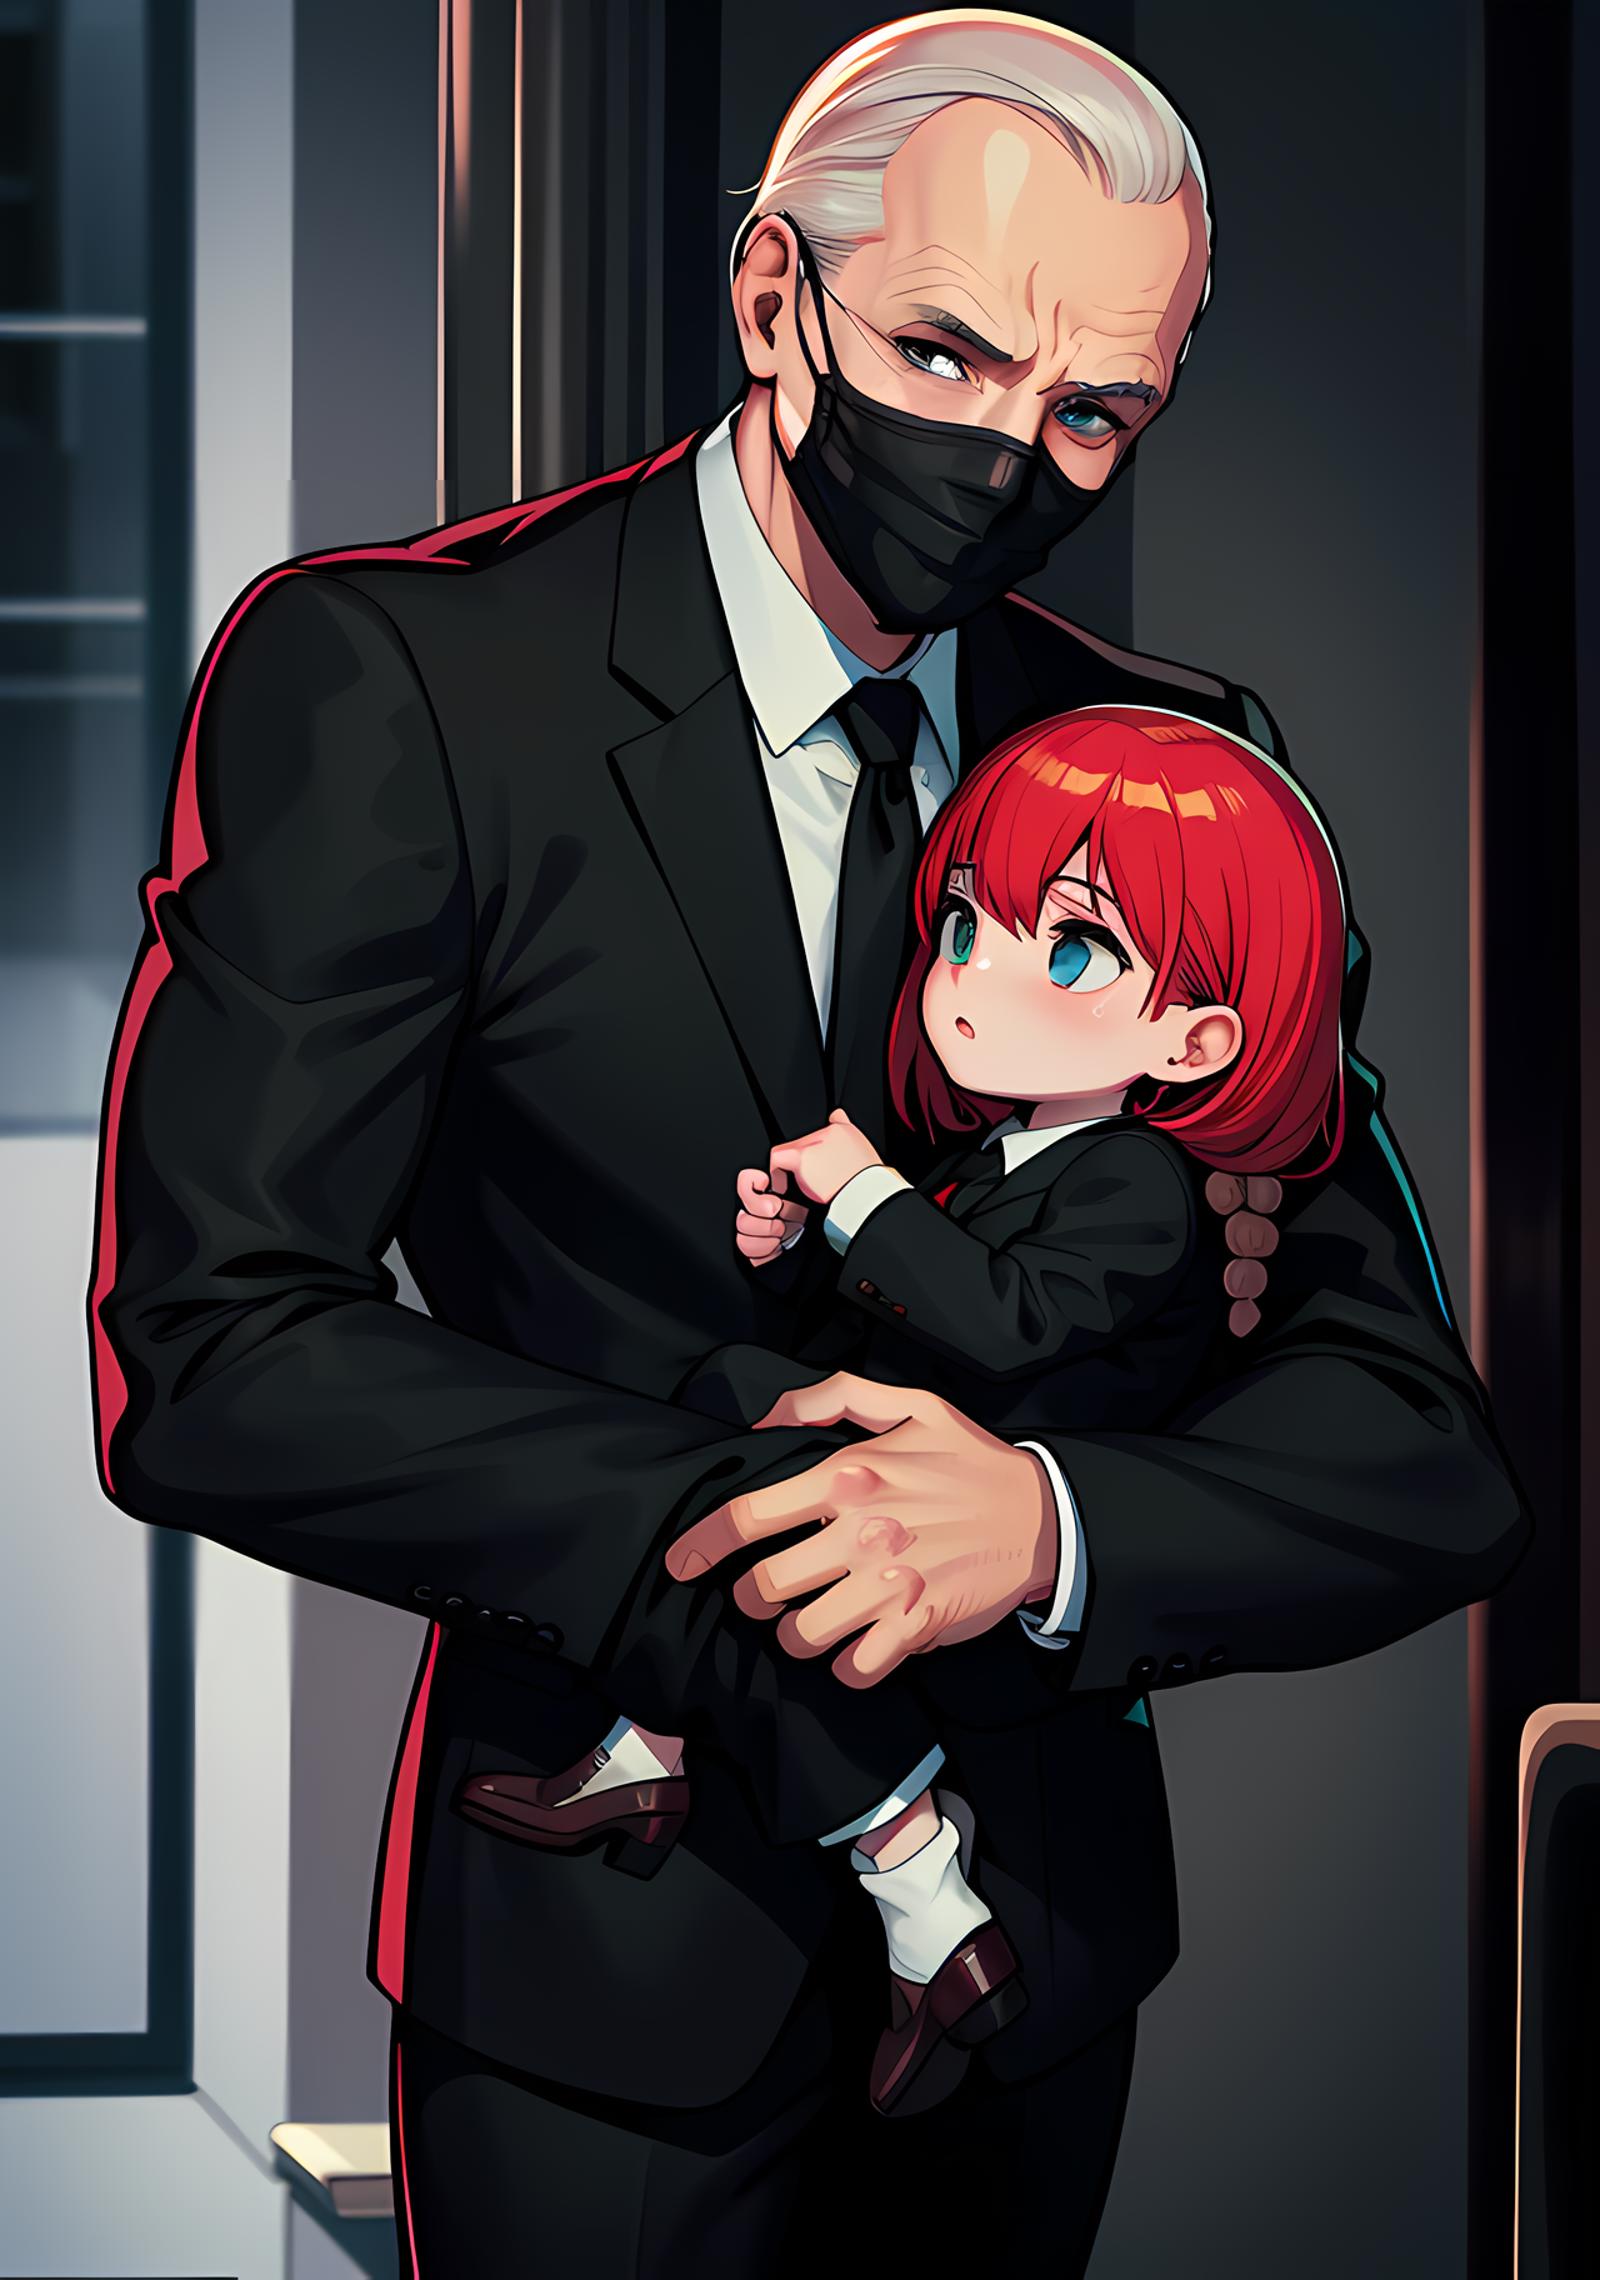 A man wearing a suit and a mask is holding a small child.